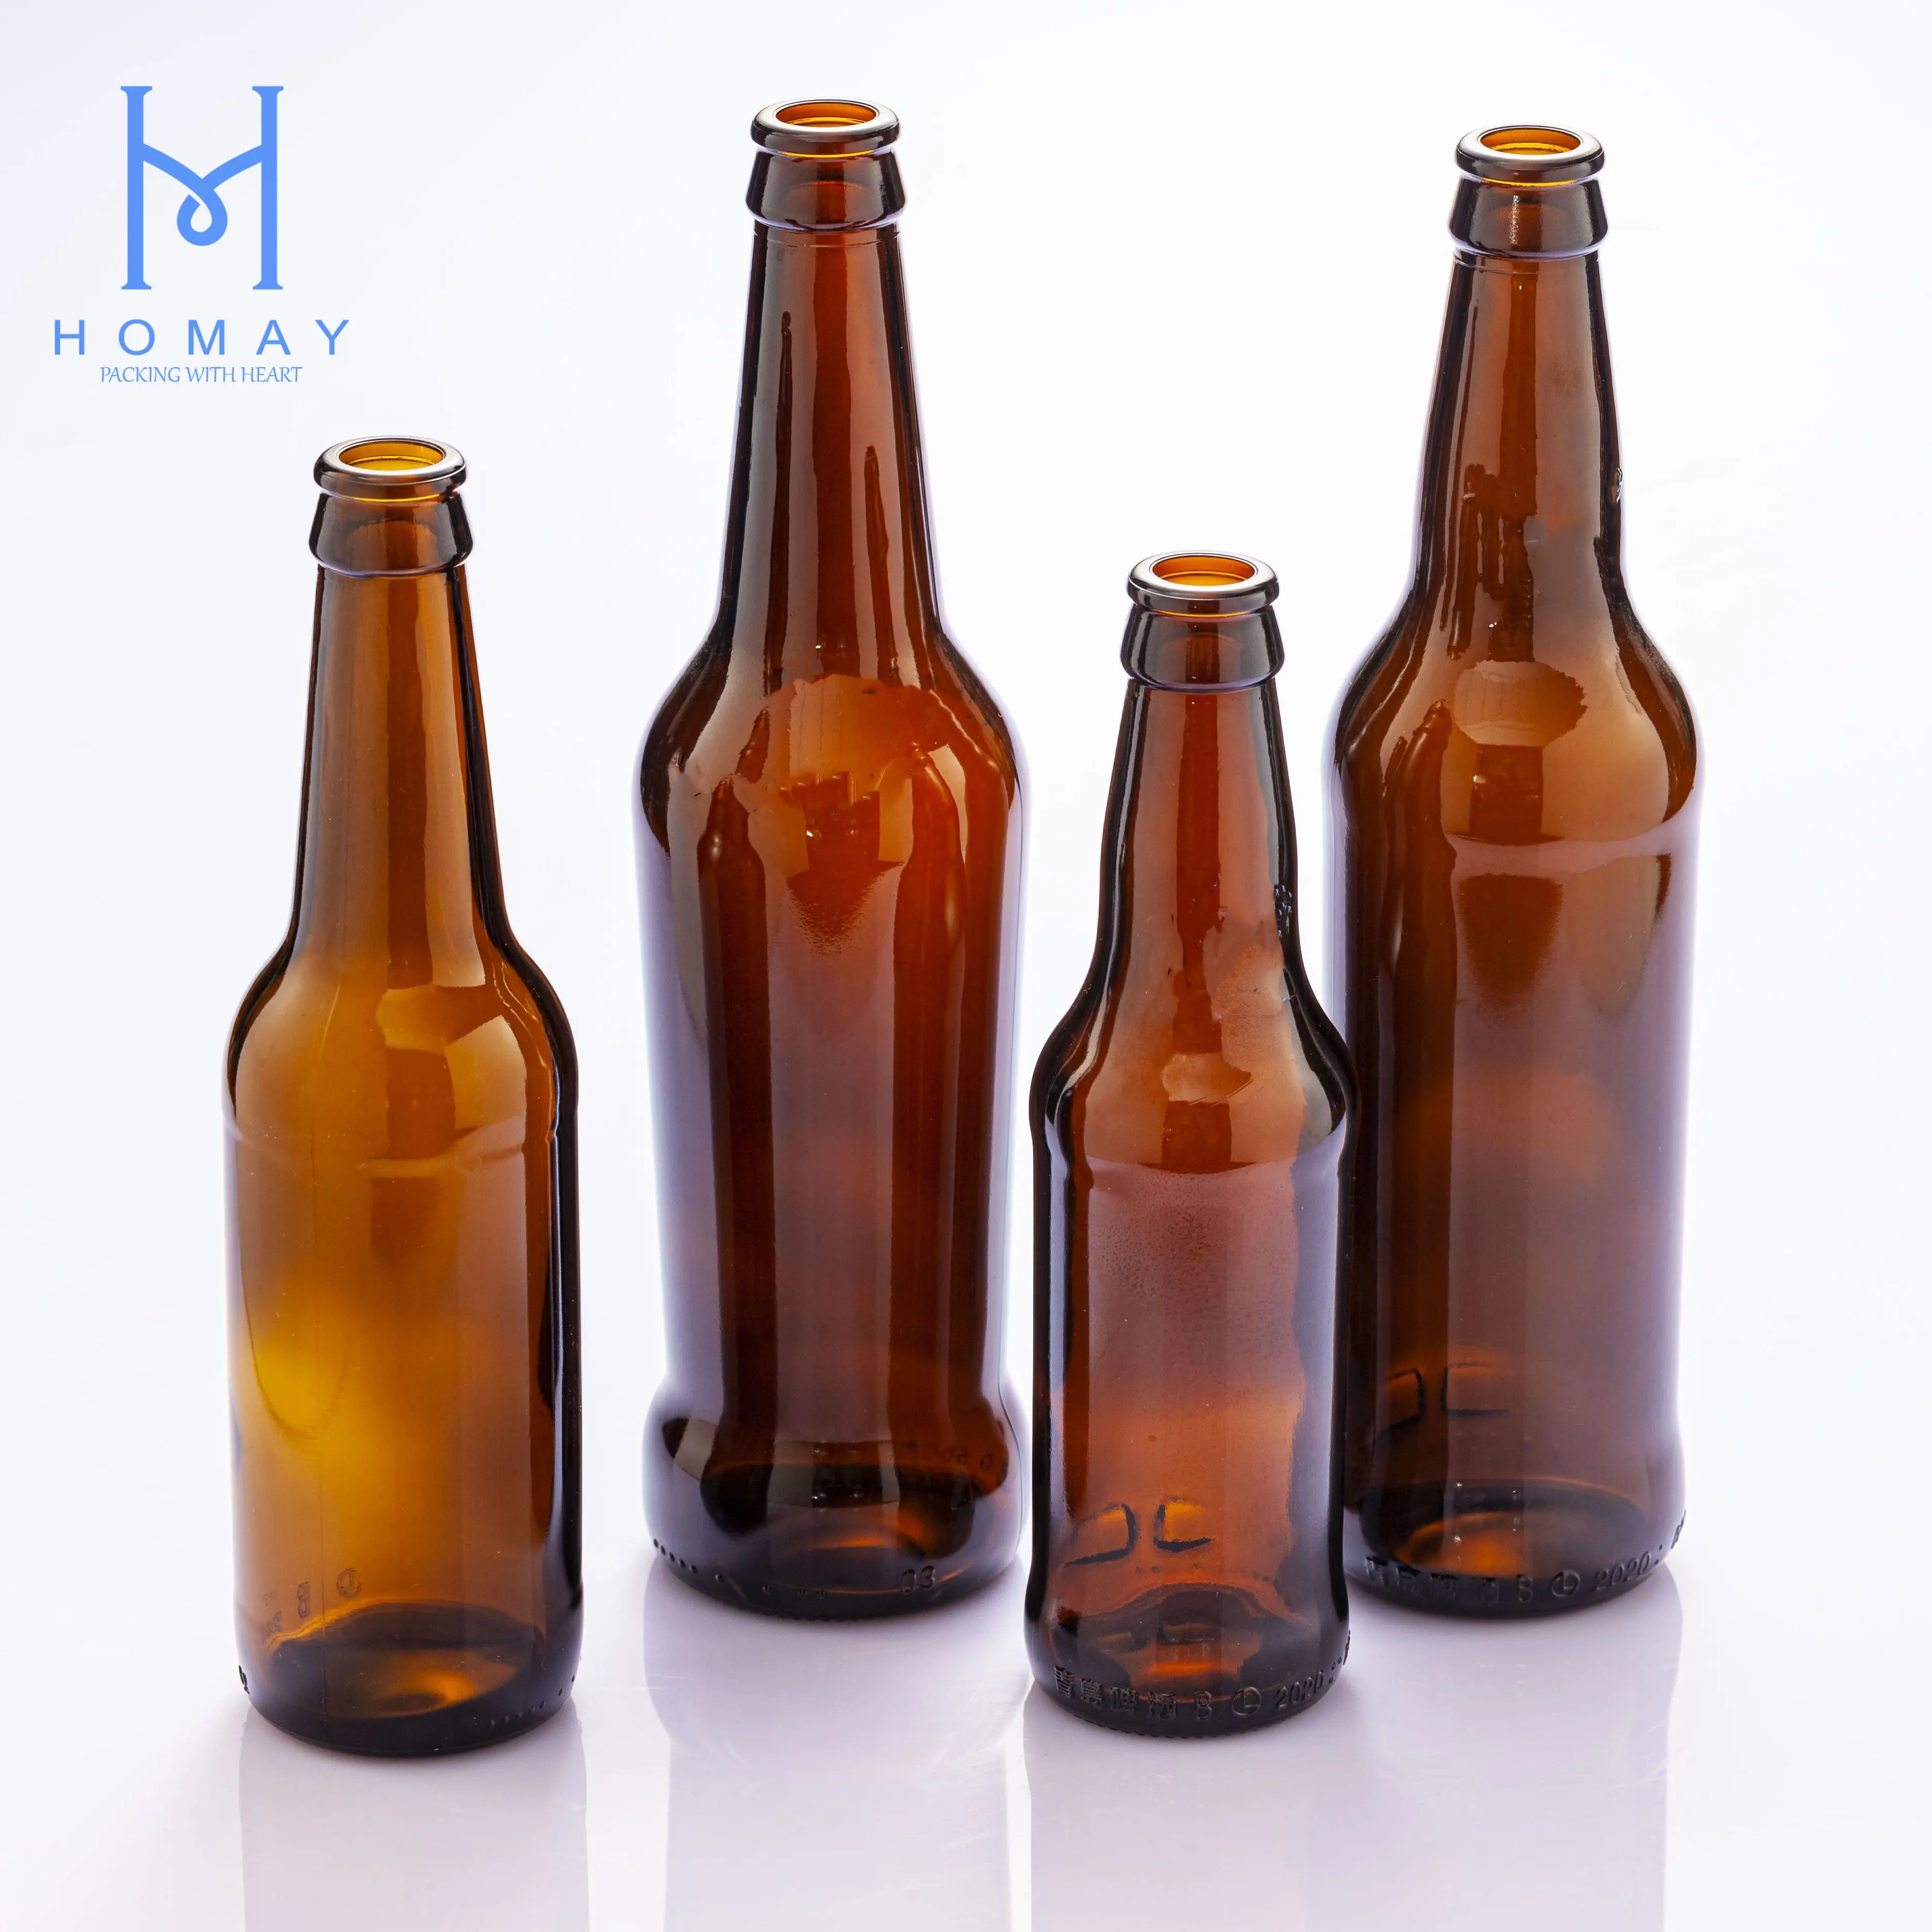 Homay packaging 100ml,330ml ,500ml,1000ml high quality beer bottle with crown cap for beverage